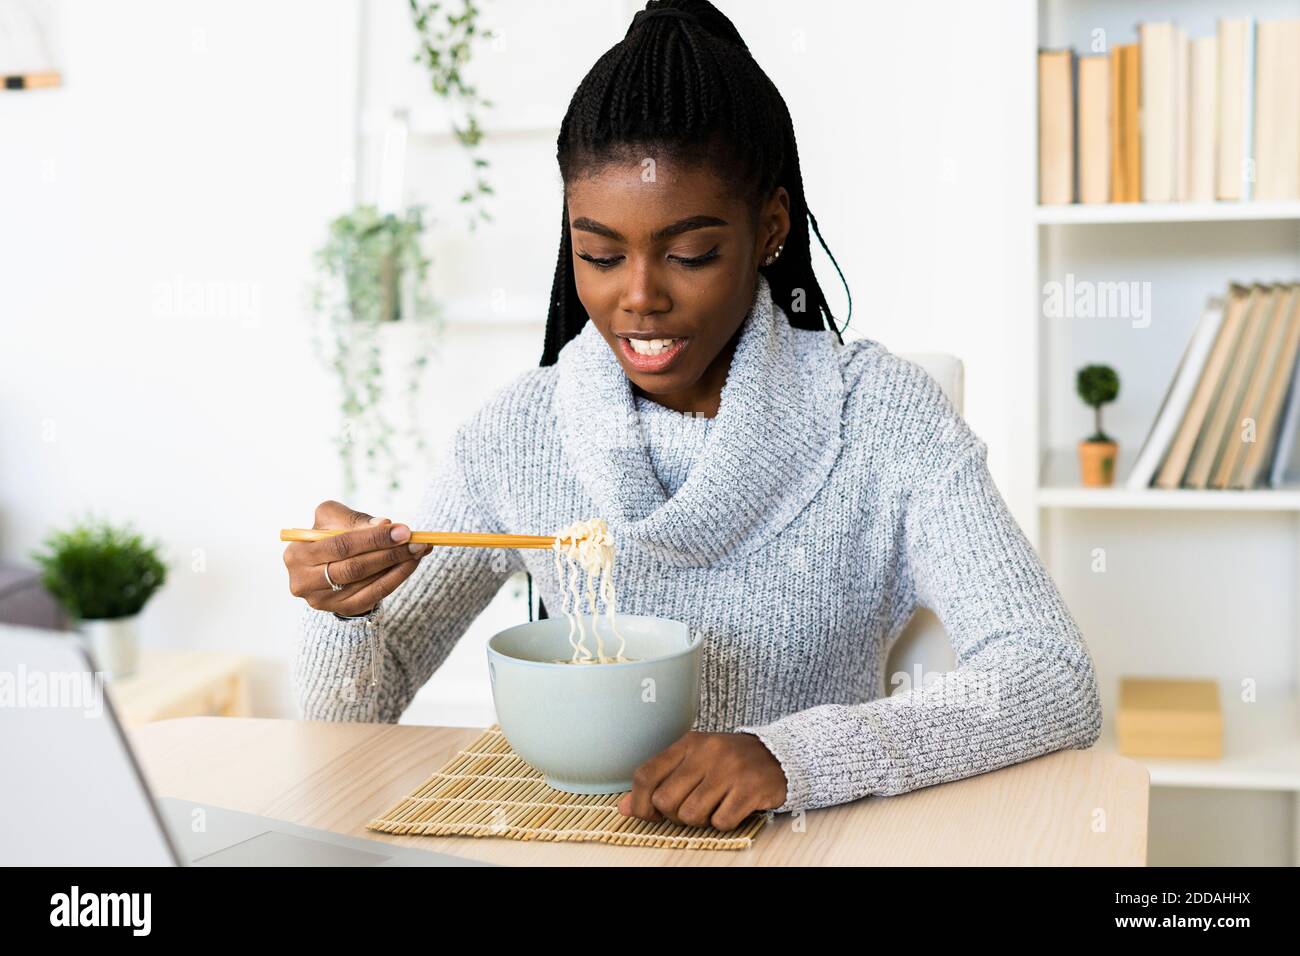 Young woman eating noodles while sitting at home Stock Photo